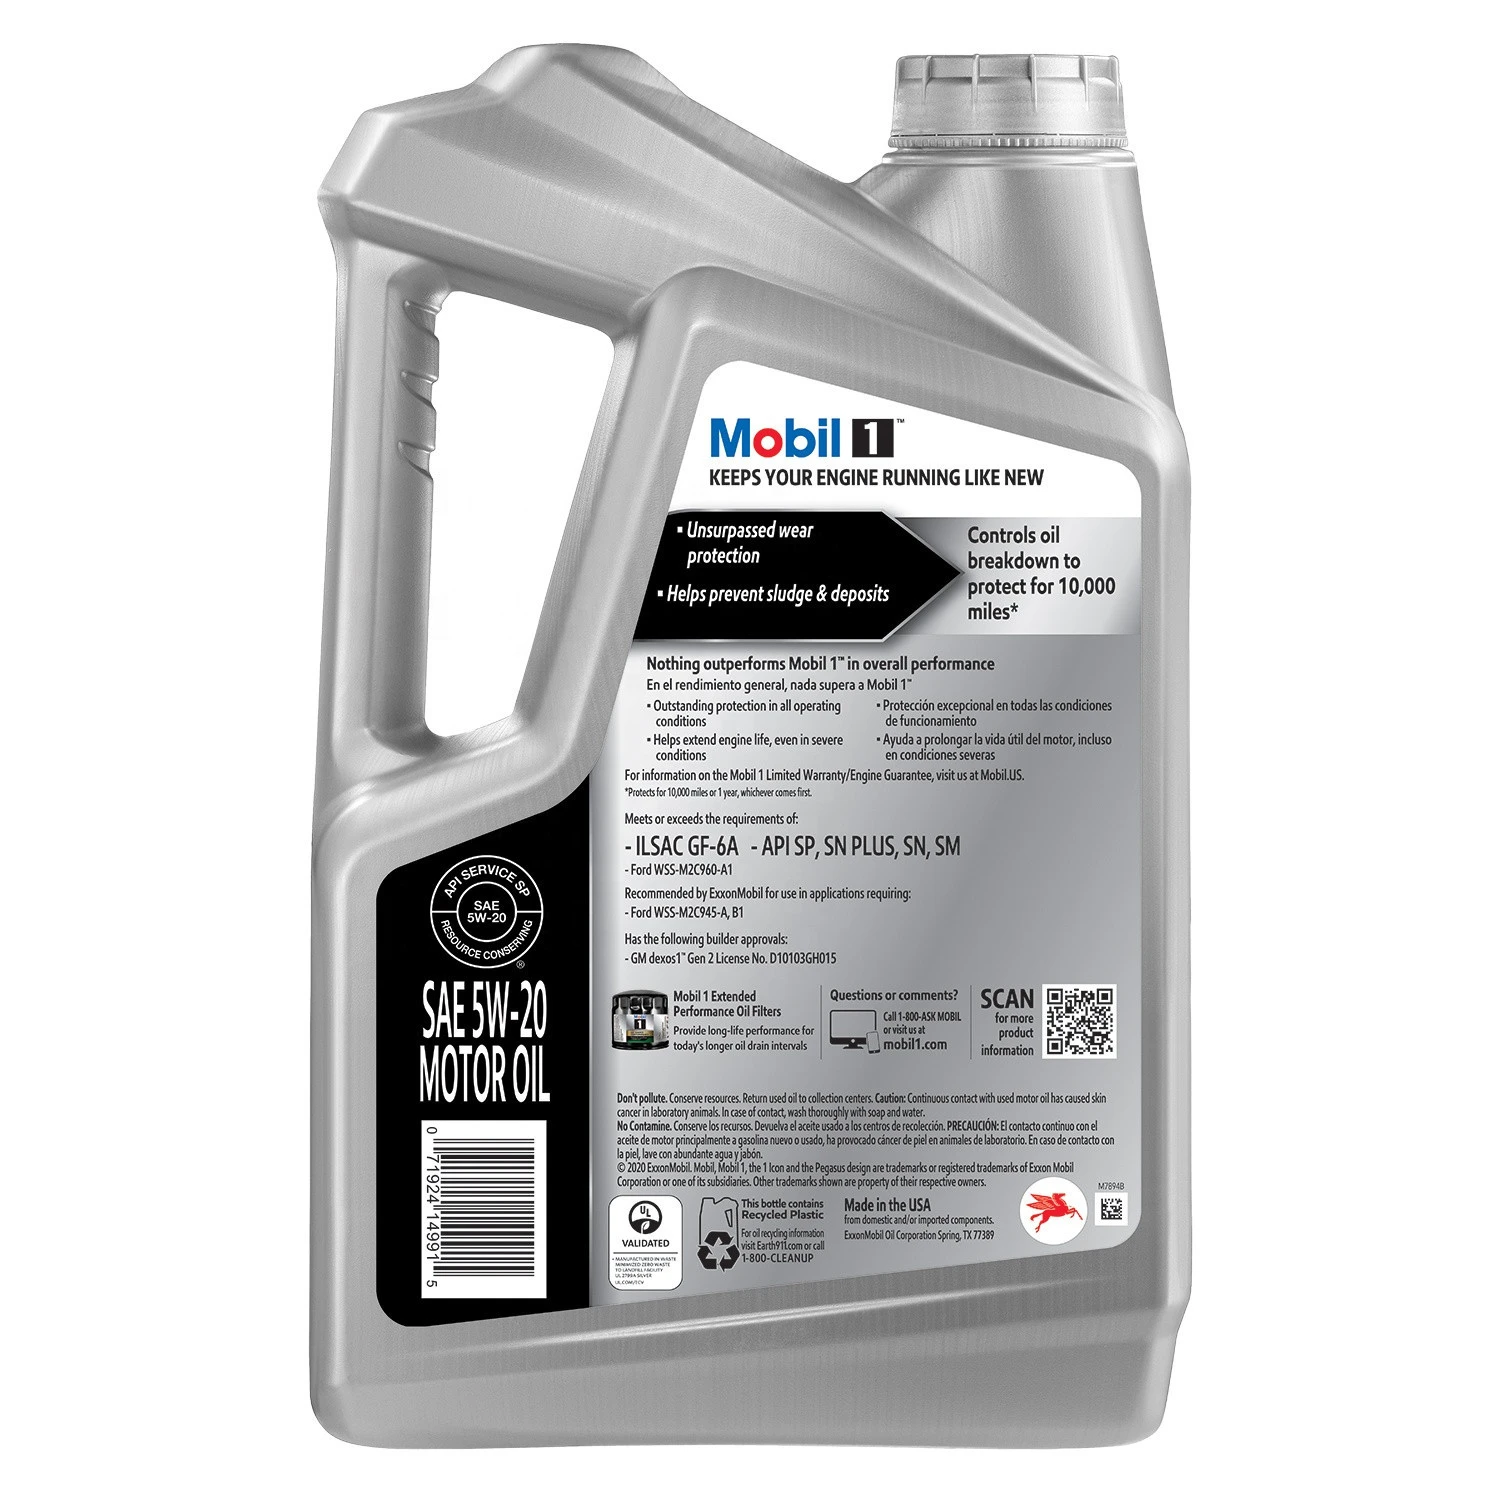 High quality Mobil 1 Automotive Lubricant Full Synthetic 5W-20, 5 Quart (4.73 Liter)